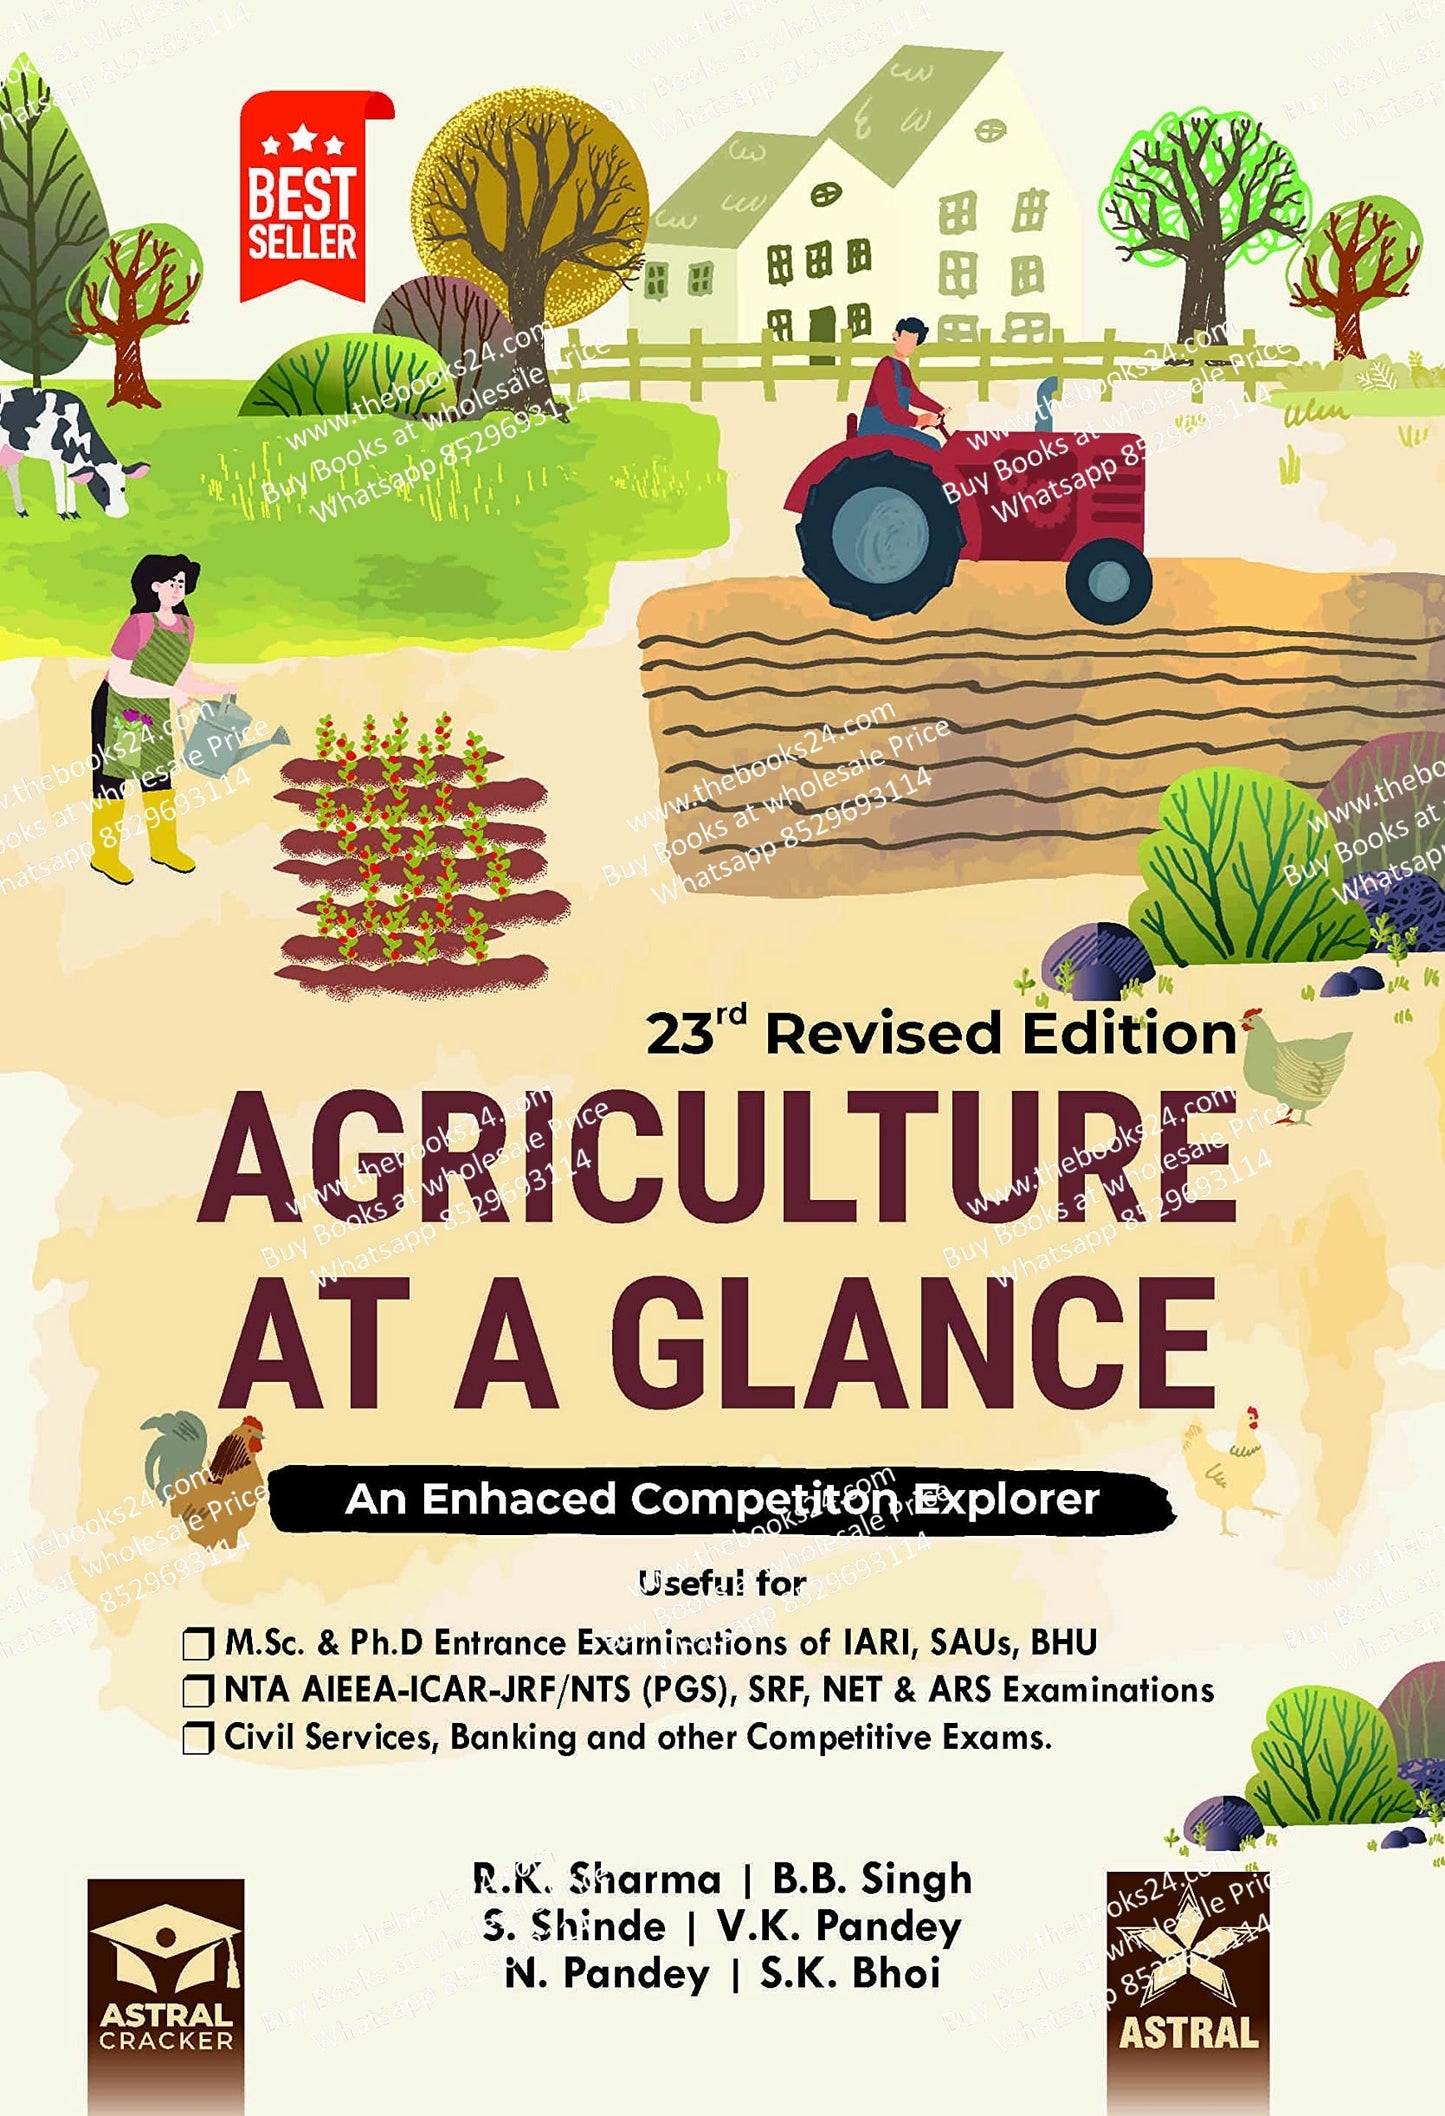 Agriculture at a Glance ( An Enhanced Competition Explorer)